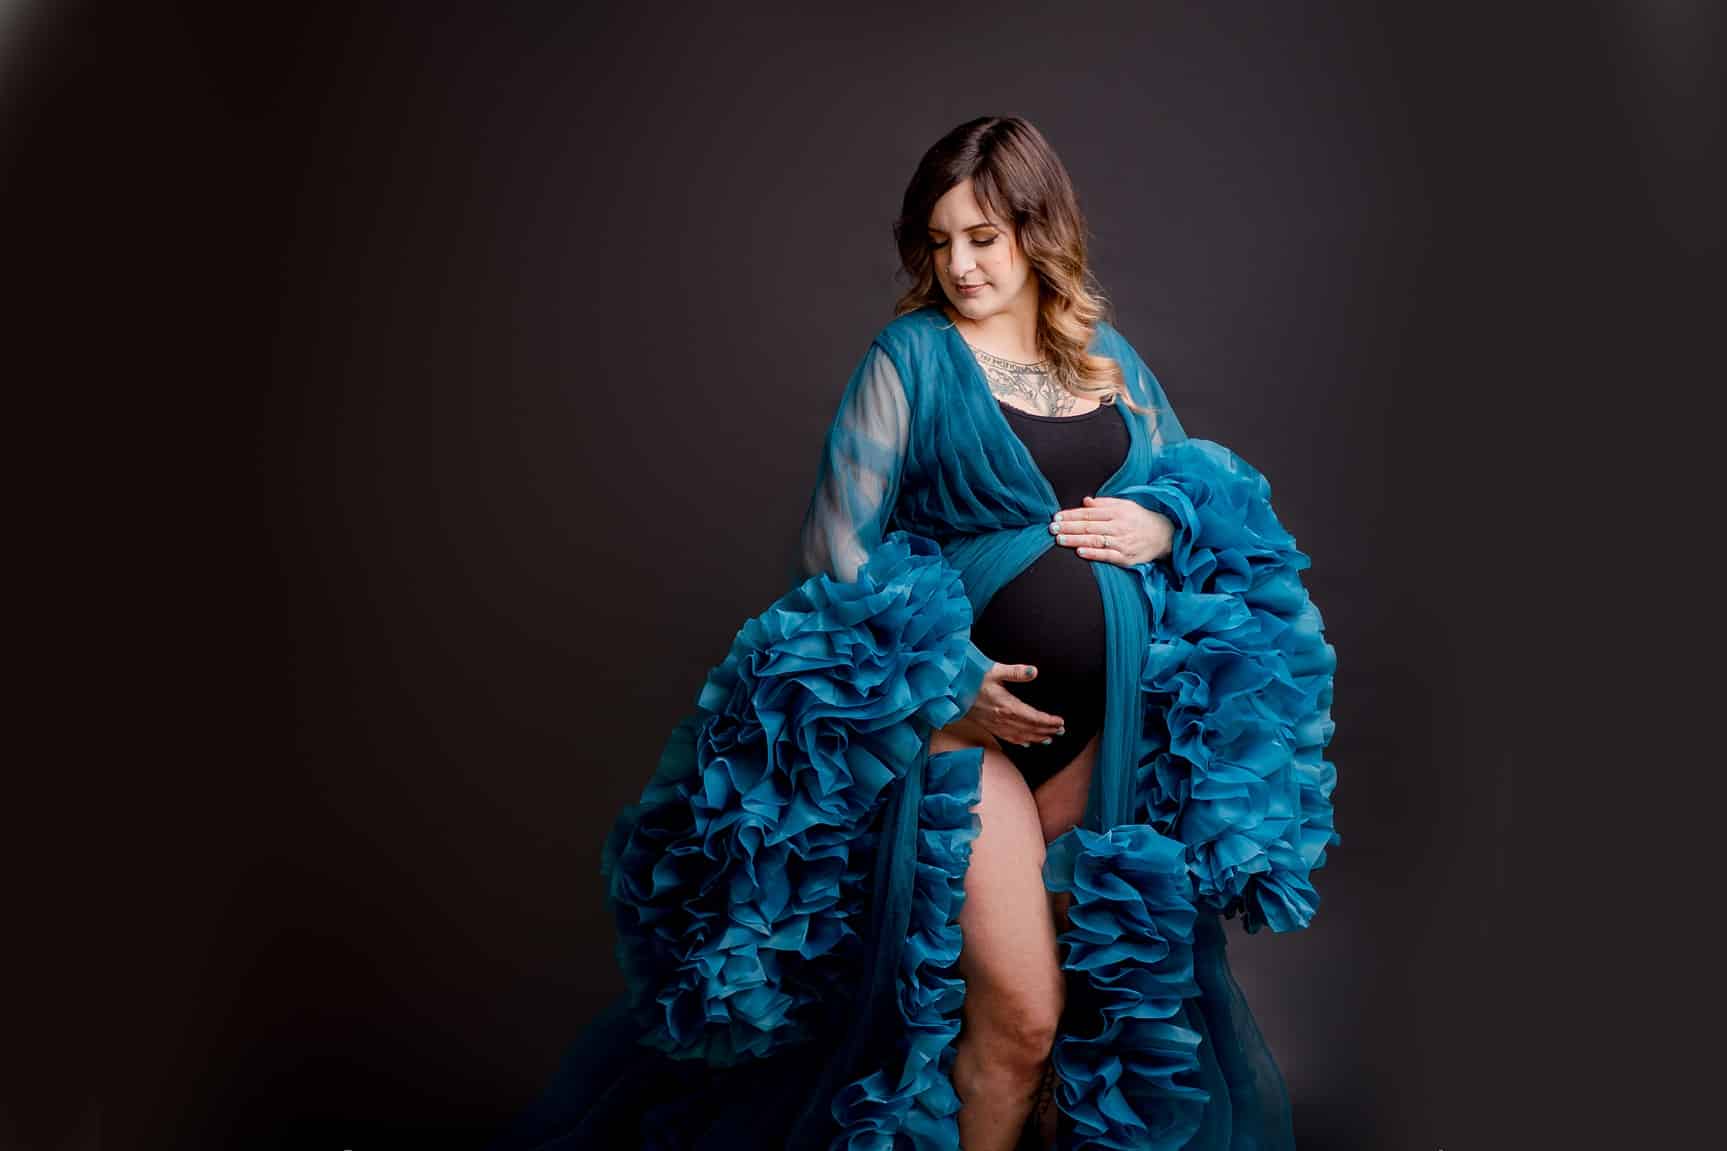 How Far In Advance Should I Book Maternity Pictures